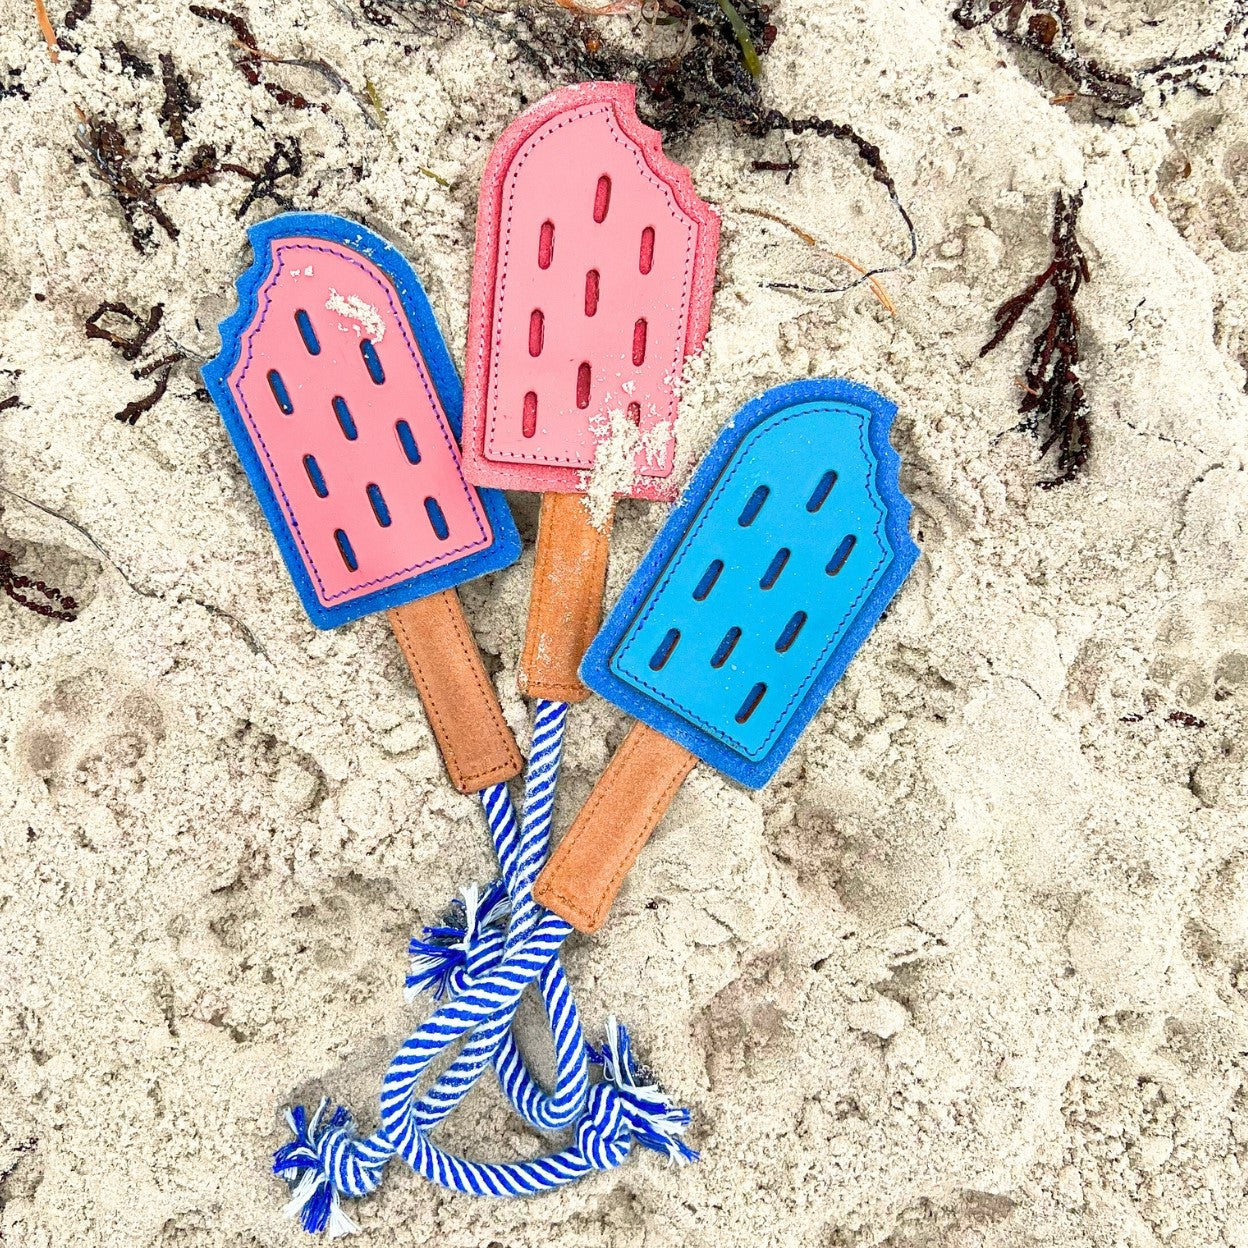 Three colorful compostable dog toy decorations with Georgie Paws Icy Pole - blue tops, along with brown sticks and a blue-and-white striped ribbon, are placed on sand, suggesting a whimsical summer beach theme.